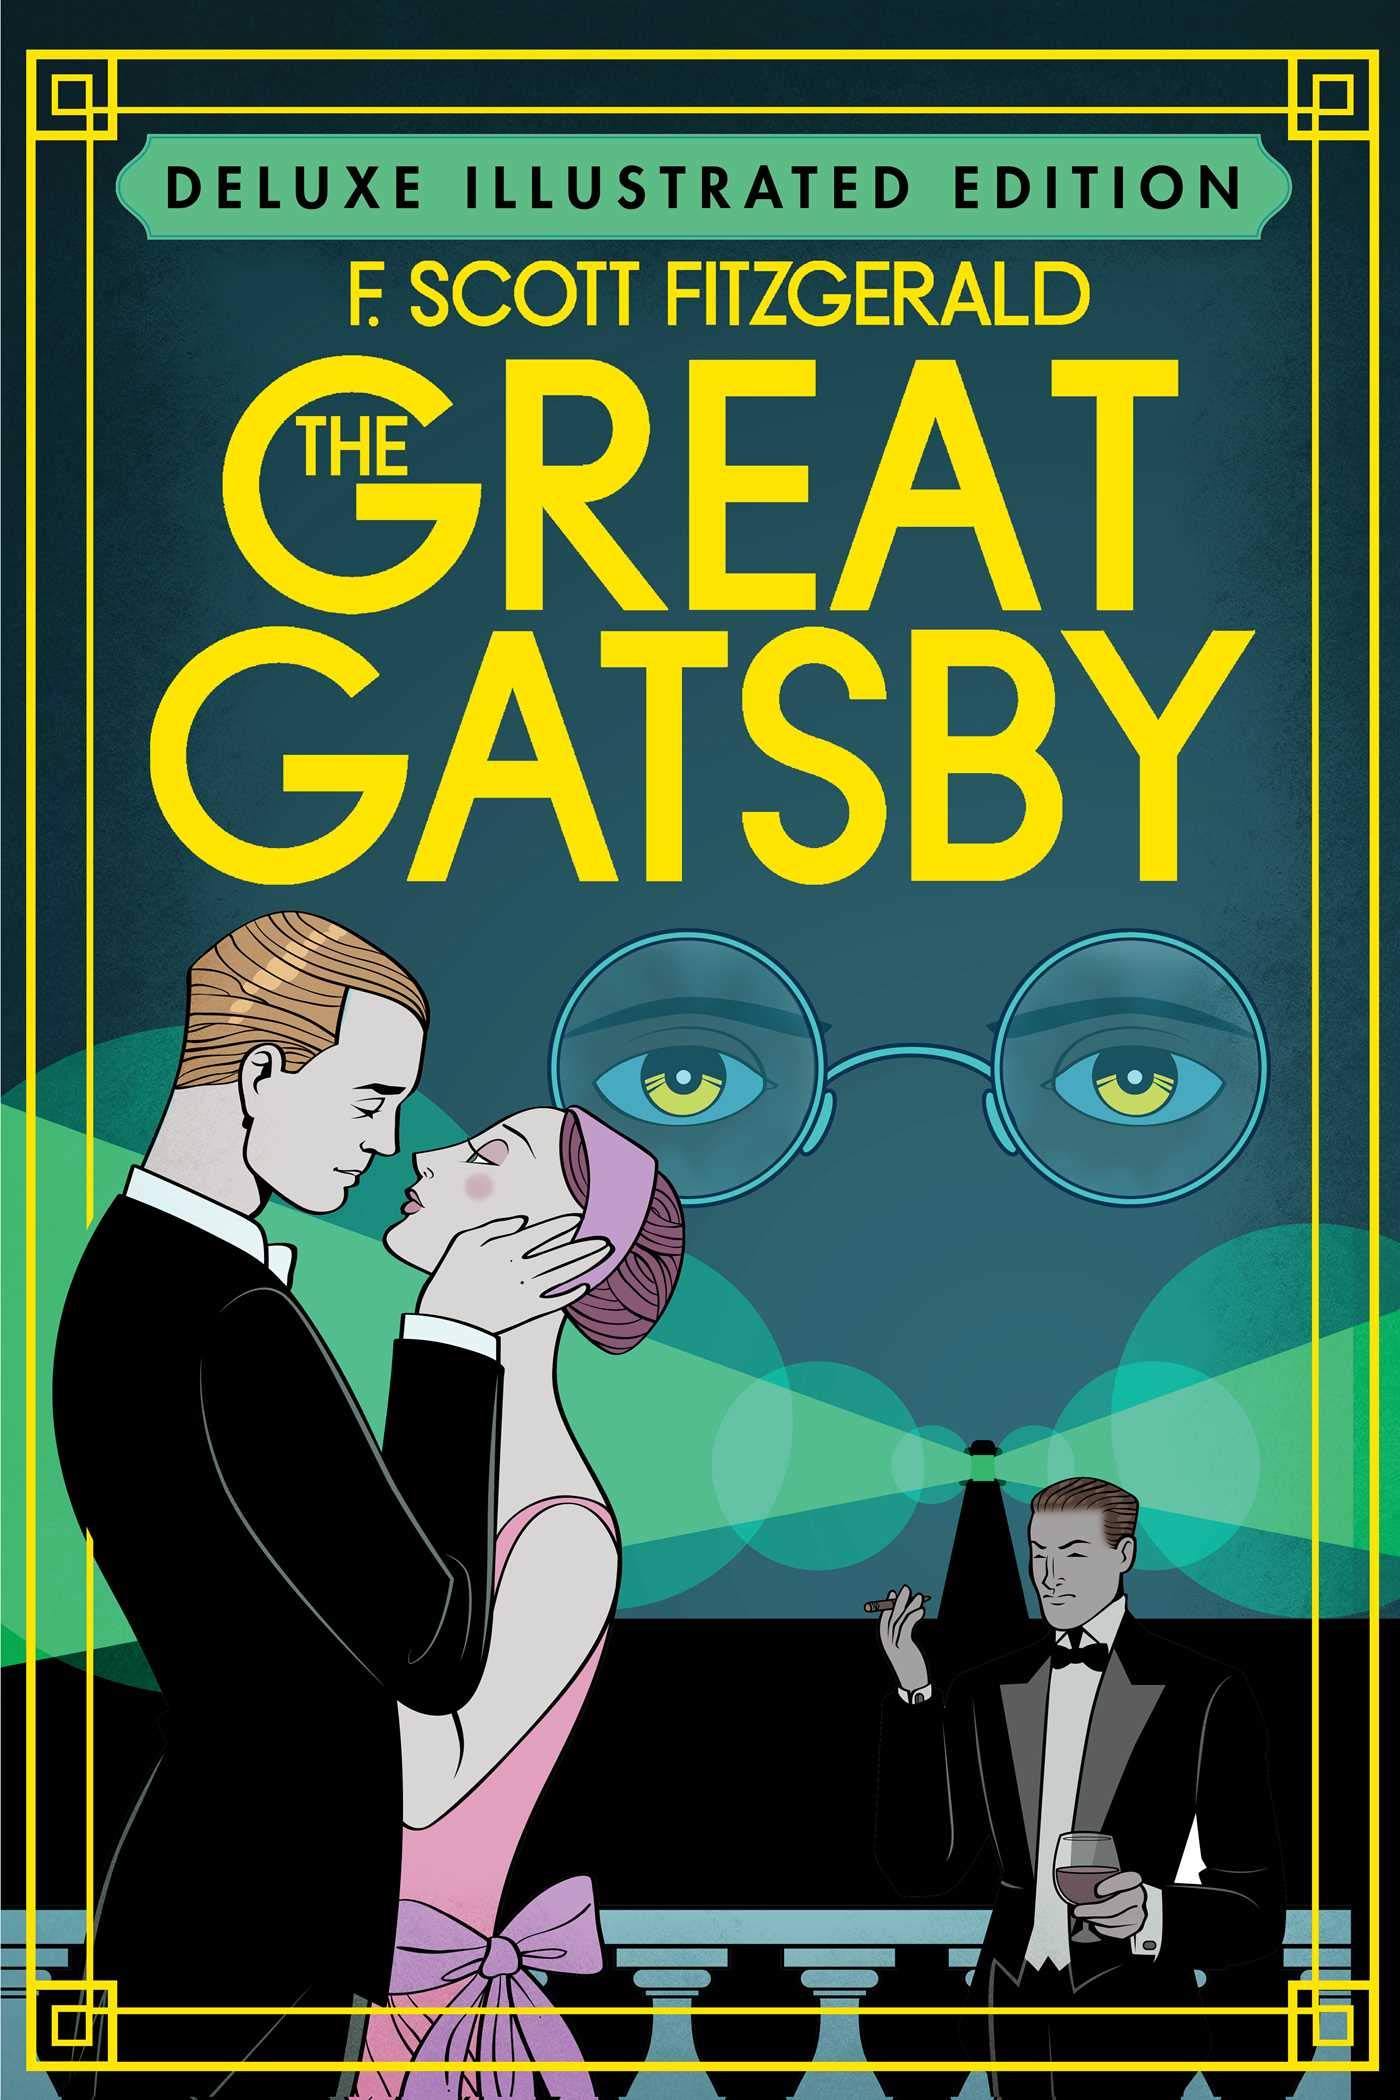 book review of great gatsby